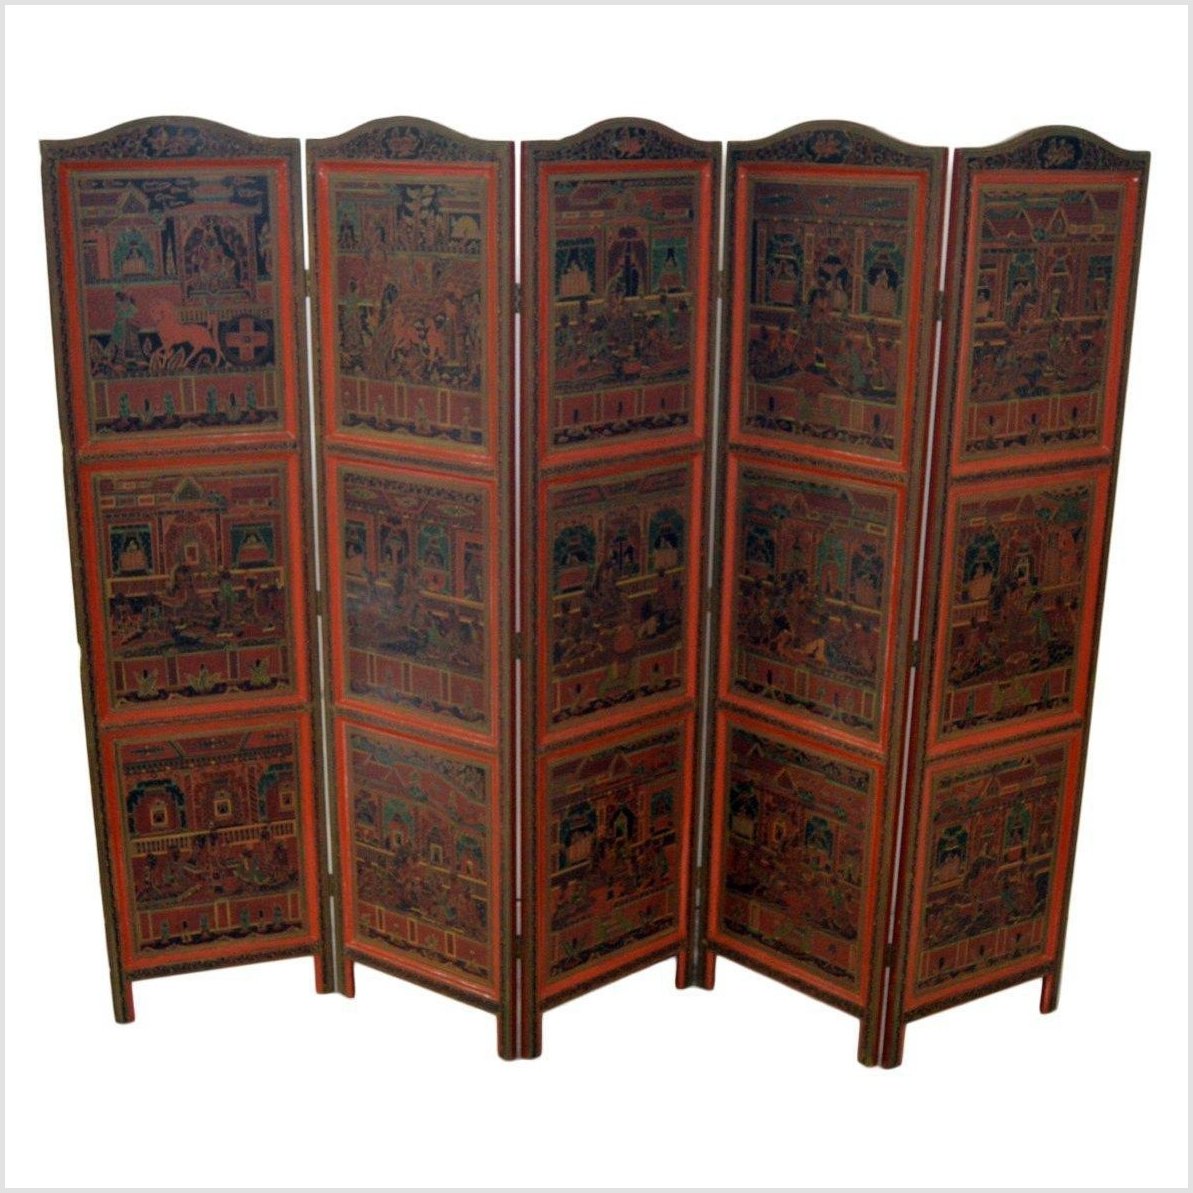 4-Panel Middle Eastern Art Inspired Screen- Asian Antiques, Vintage Home Decor & Chinese Furniture - FEA Home